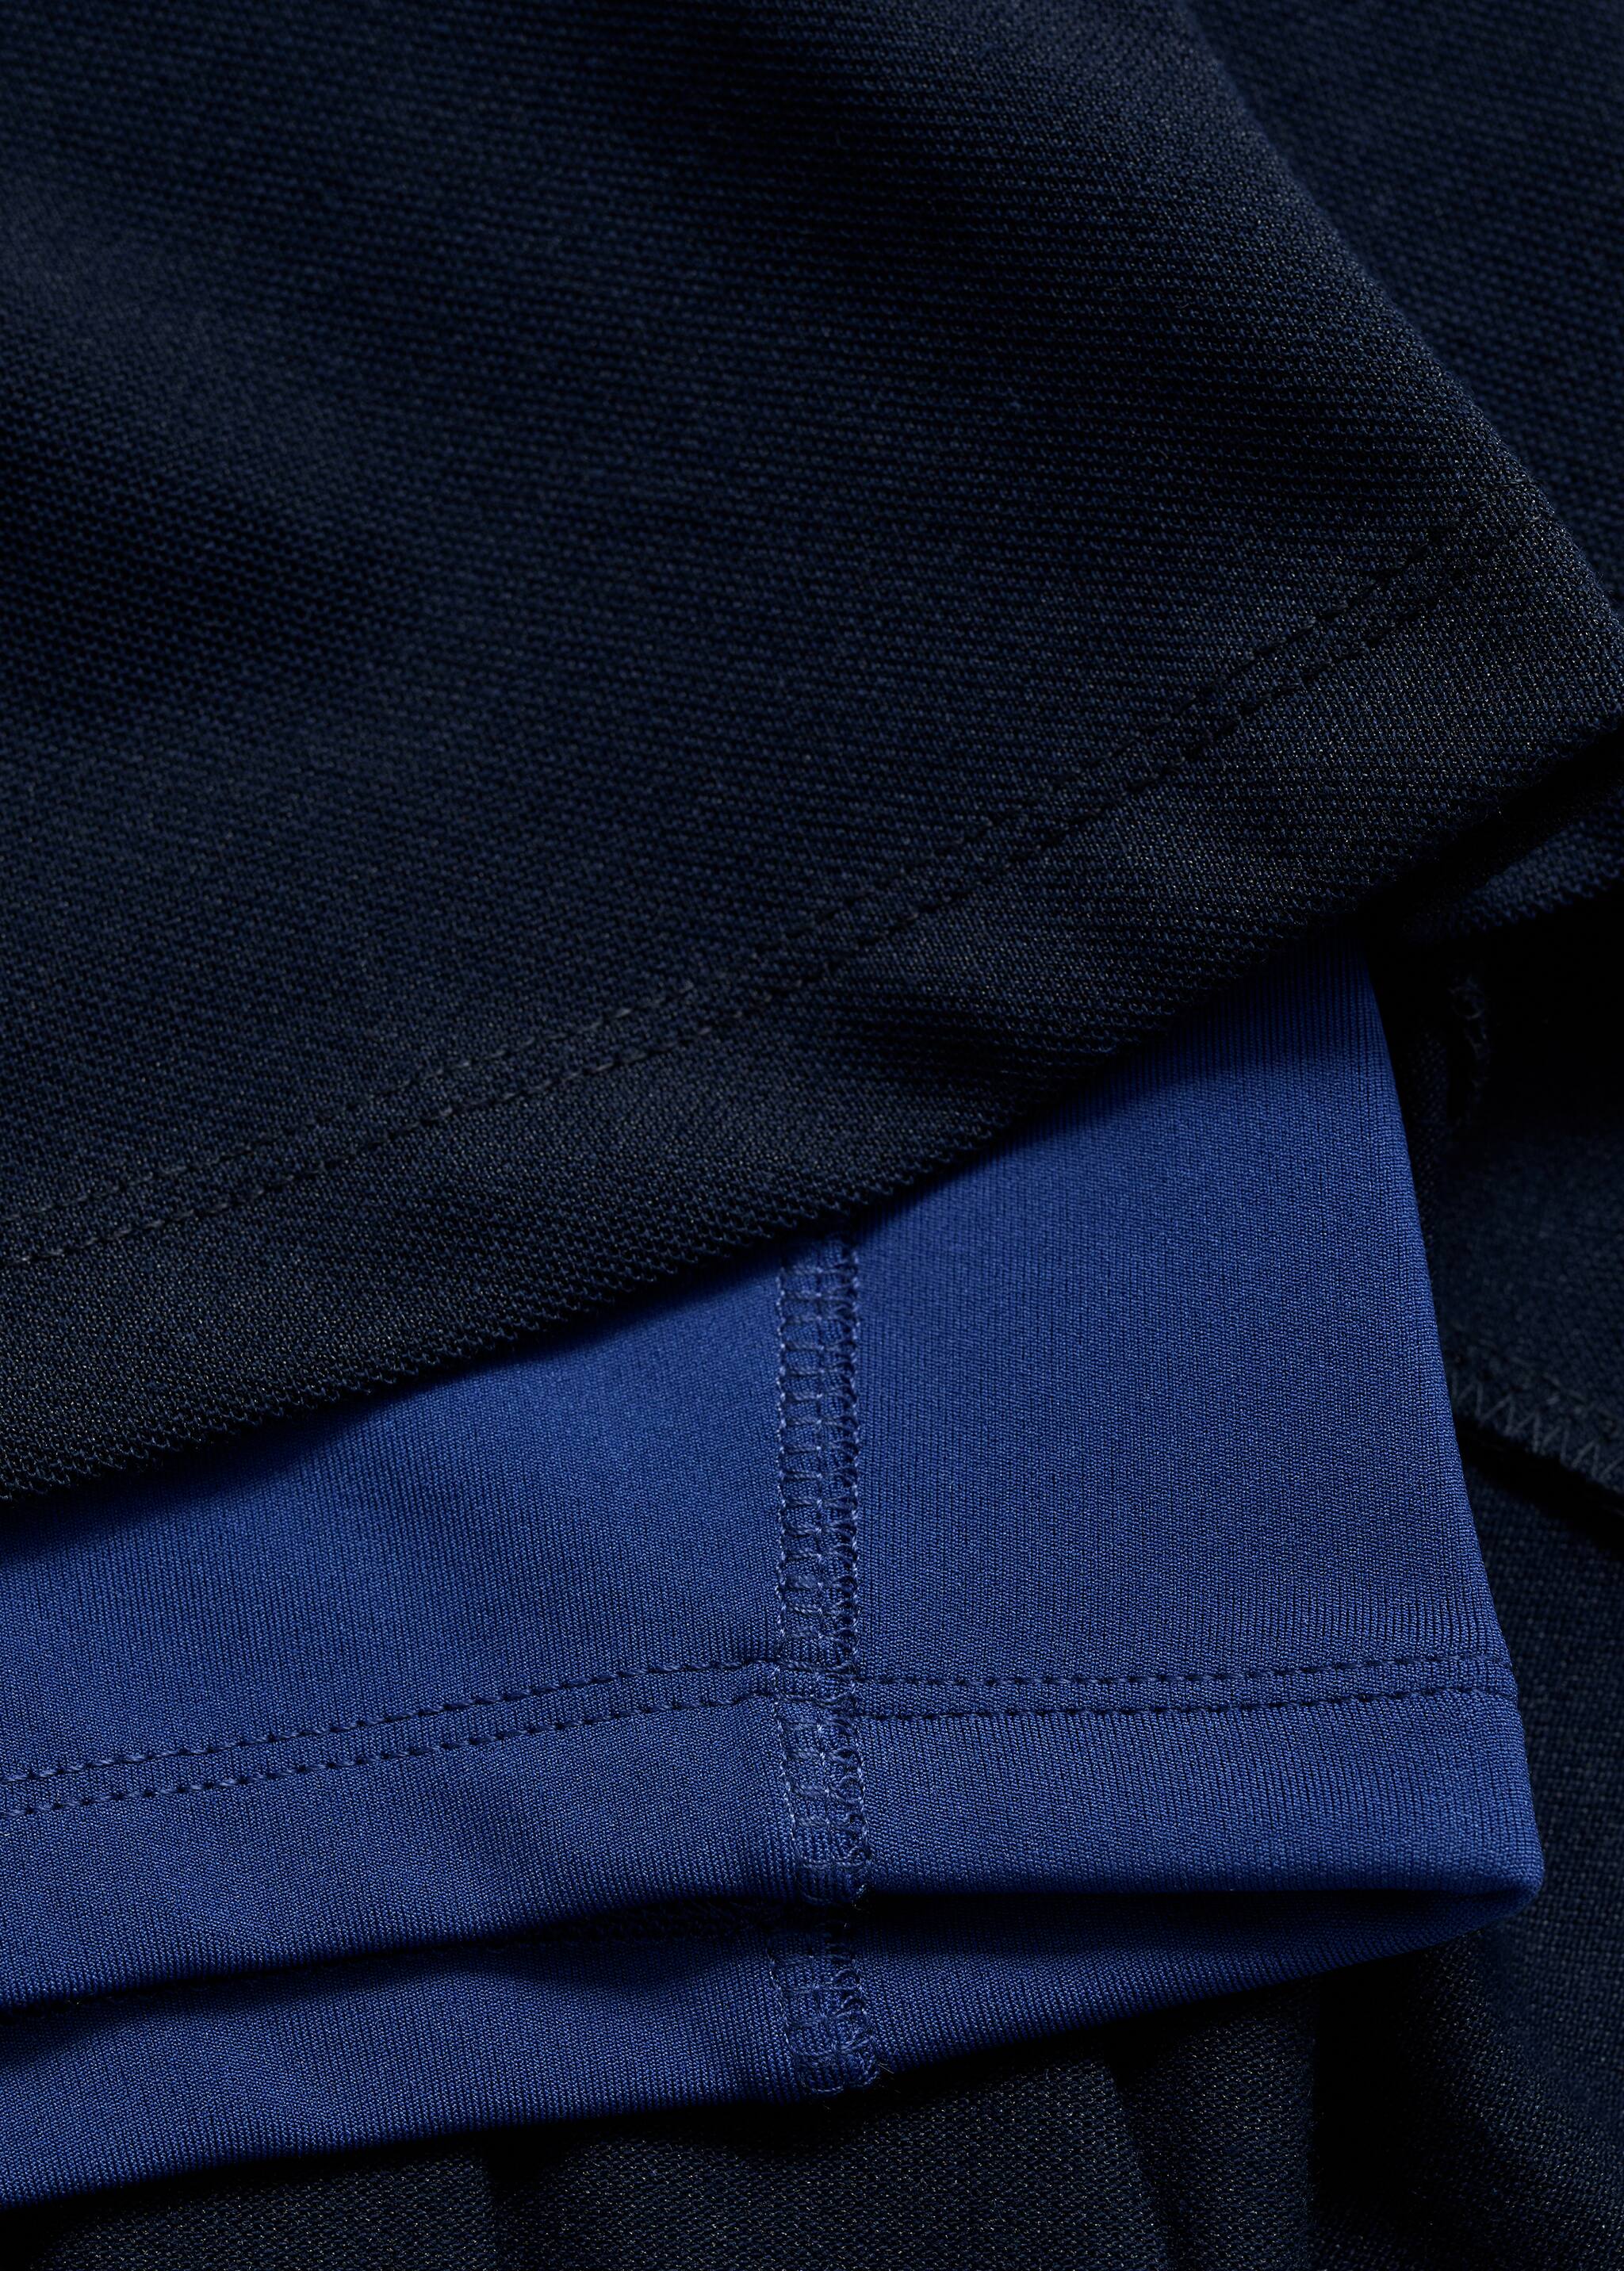 Wide pleated skirt - Details of the article 0